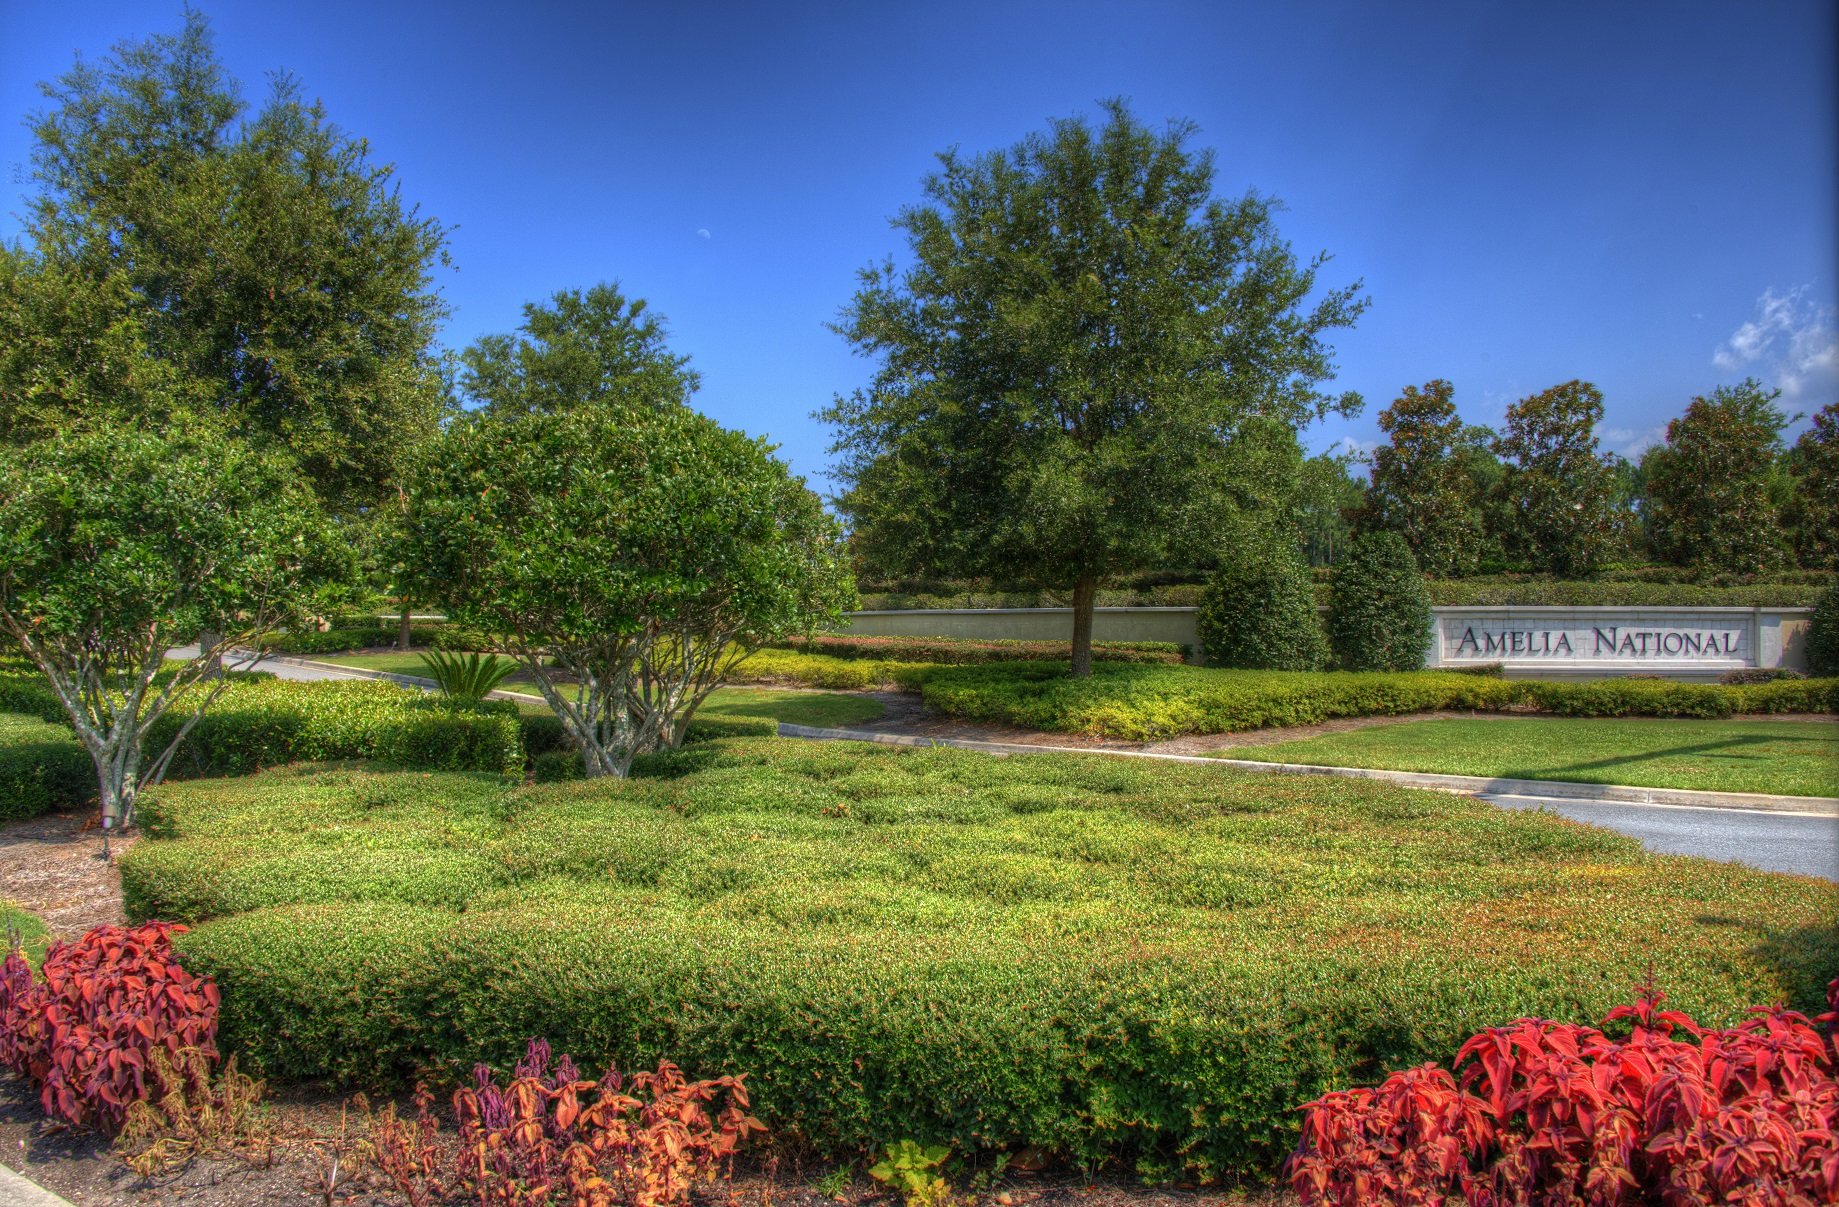 Entrance at Amelia National Golf and Country Club